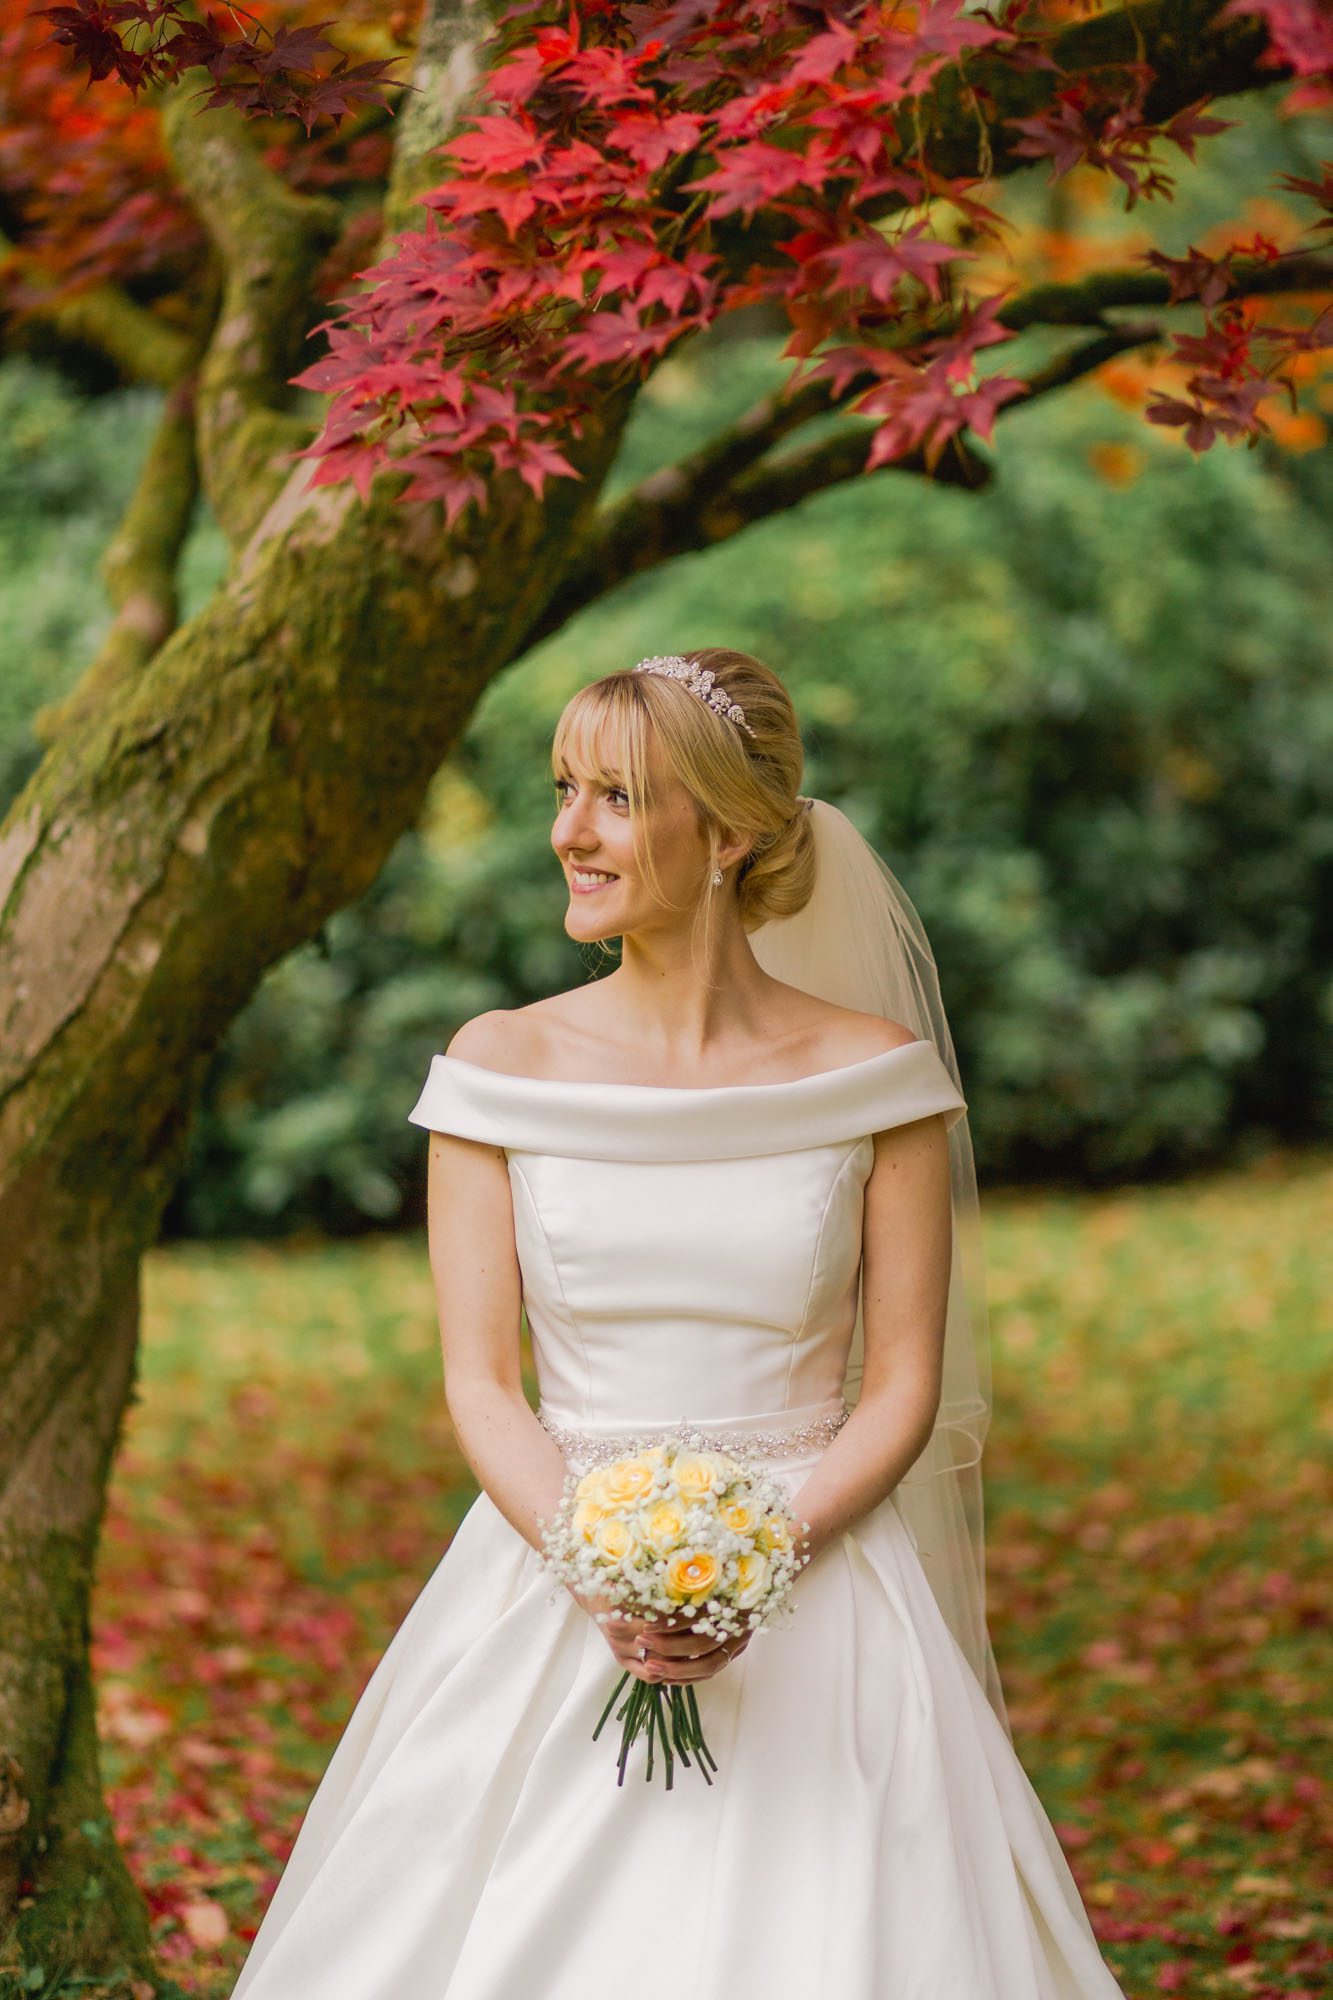 A bride in a beautiful wedding dress holding her bouquet of flowers in the Ramser gardens in Autumn.